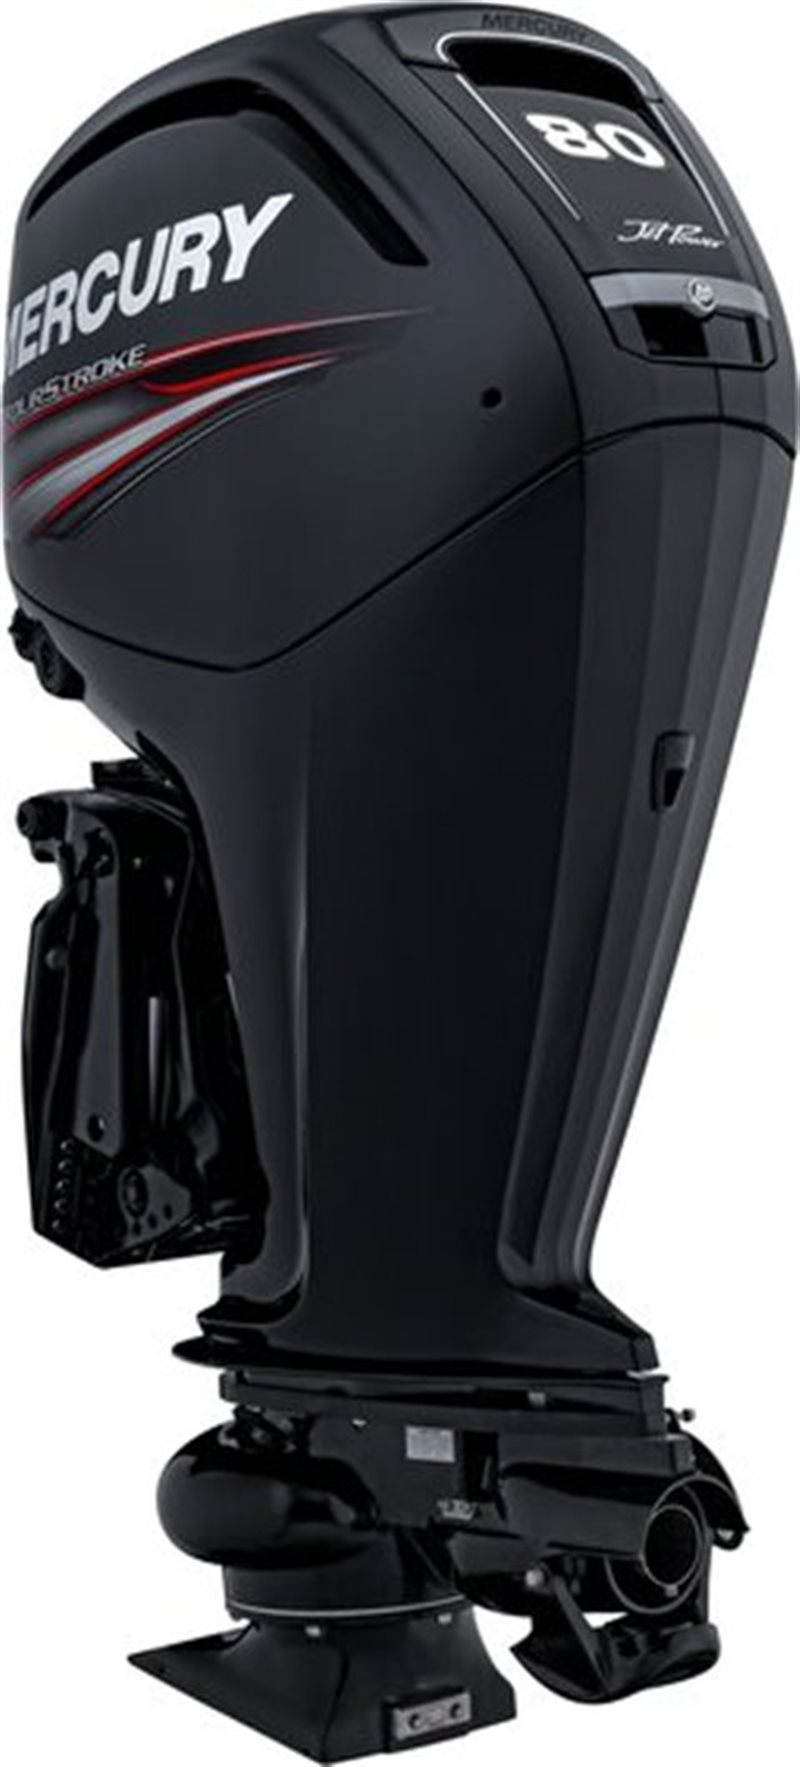 2020 Mercury Outboard FourStroke Jet Outboards 25-80 hp 80 hp Jet FourStroke at Pharo Marine, Waunakee, WI 53597